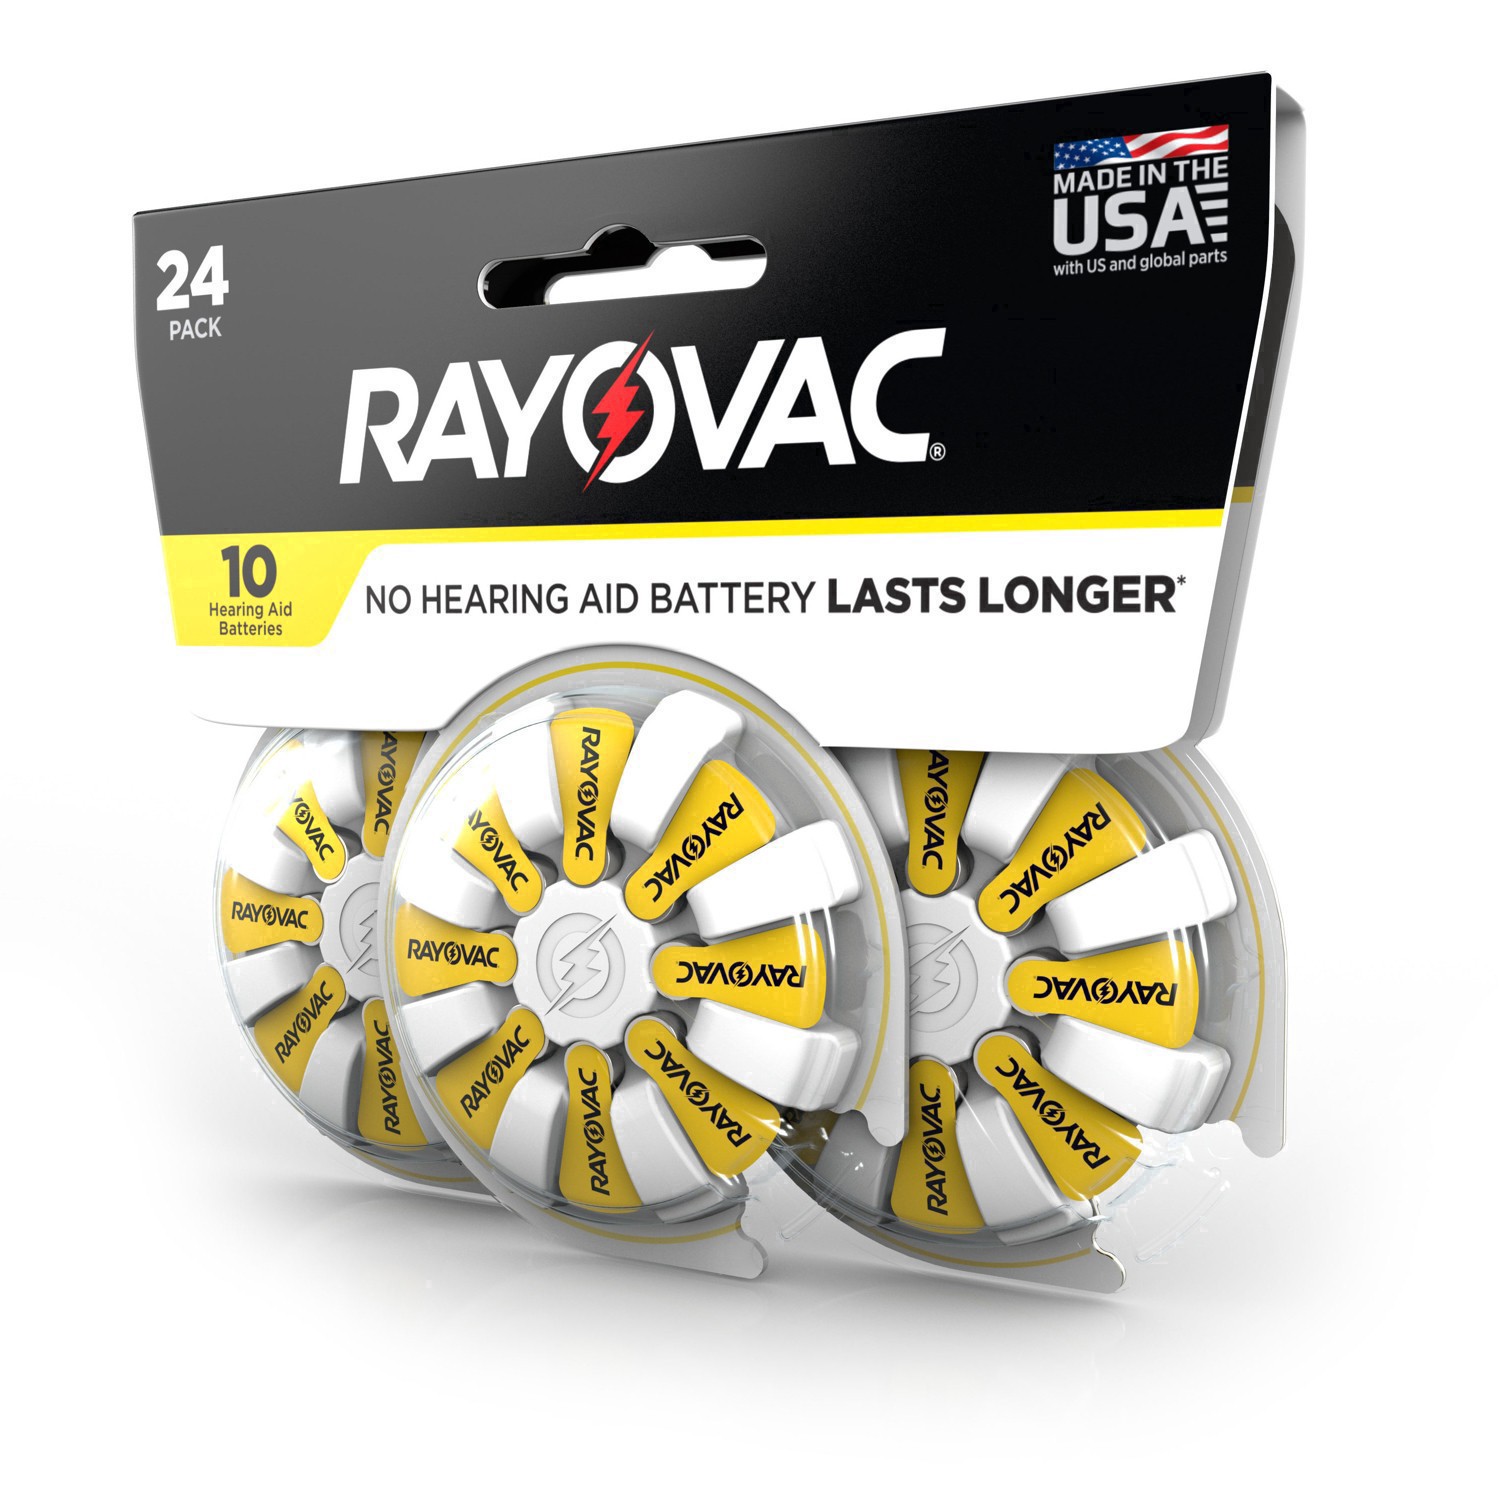 slide 30 of 37, Rayovac Size 10 Hearing Aid Batteries (24 Pack), 24 ct